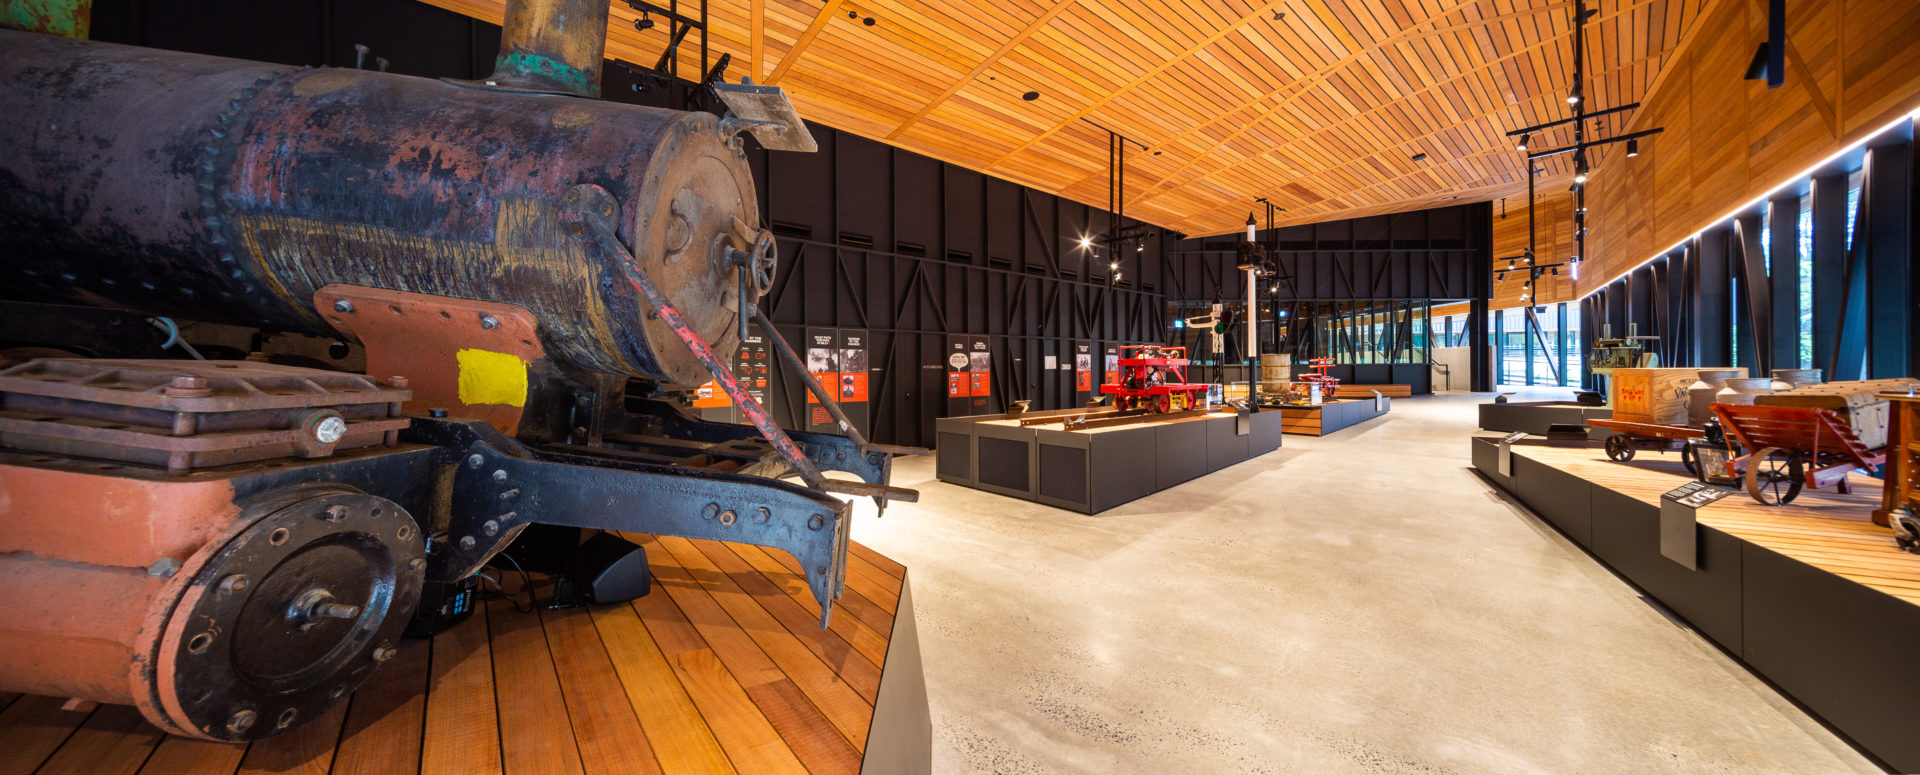 Lakeside Hall -  home to a collection of expertly curated steam artifact displays, including a replica of Puffing Billy Railway’s first ever locomotive, 3A.